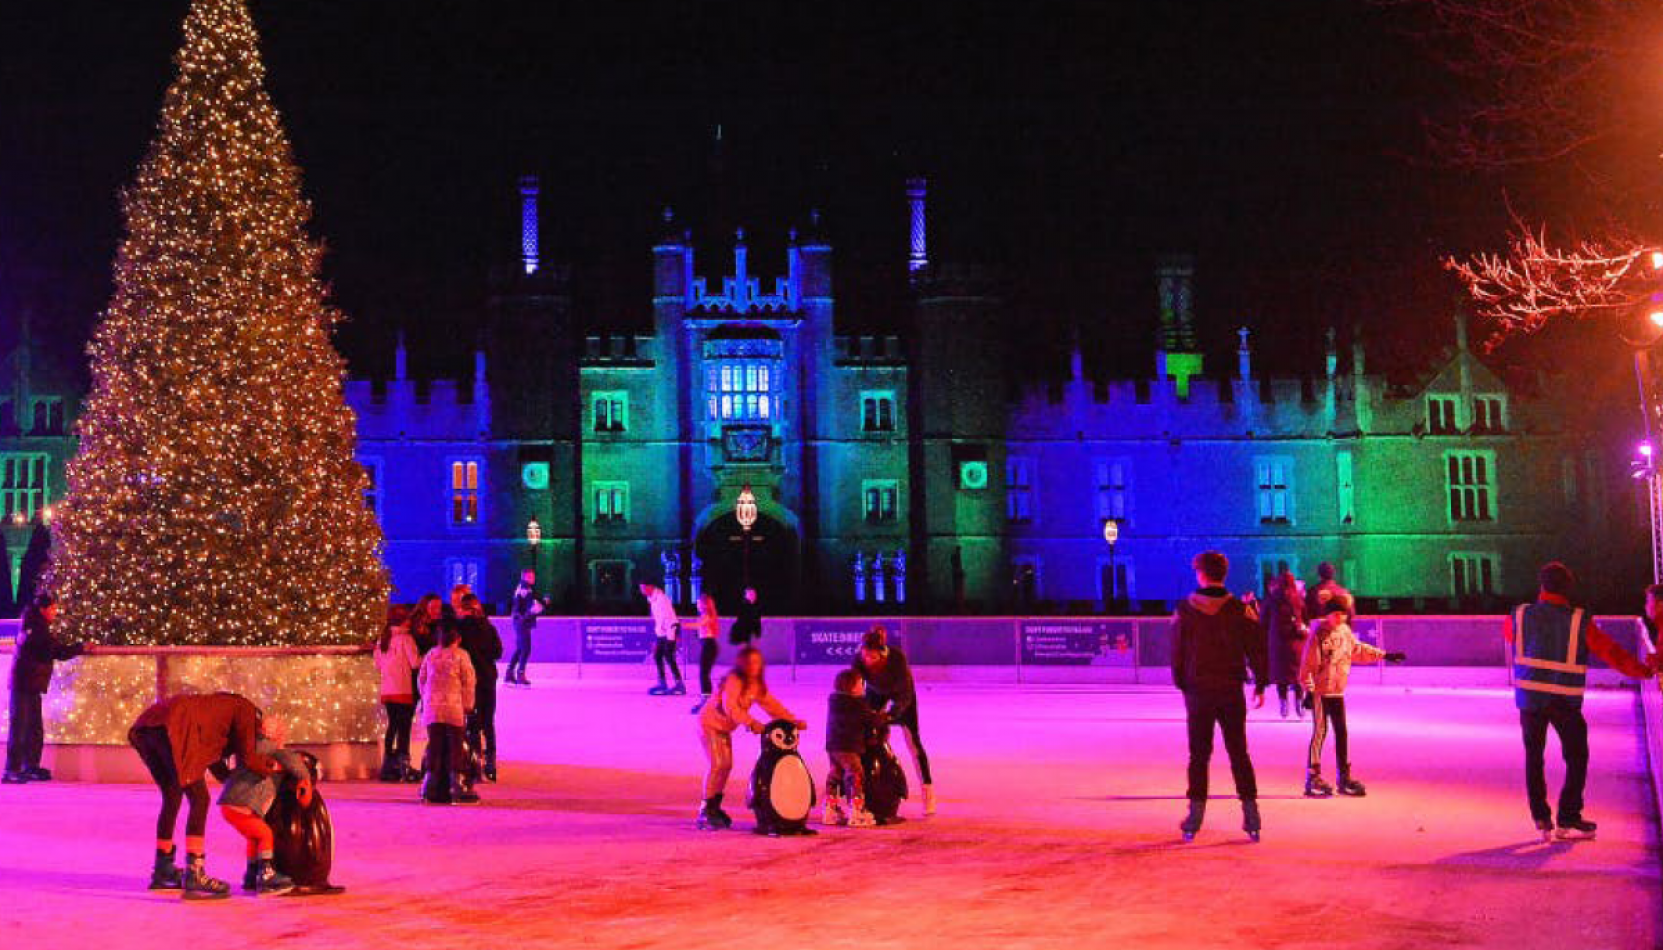 whats on this week, hampton court ice skating, ice skating, christmas, surrey christmas, ghuidlfrod, guide to surrey, guide to whats on this week, whats on in Surrey, things to do with the family, family days out, move to surrey, move to